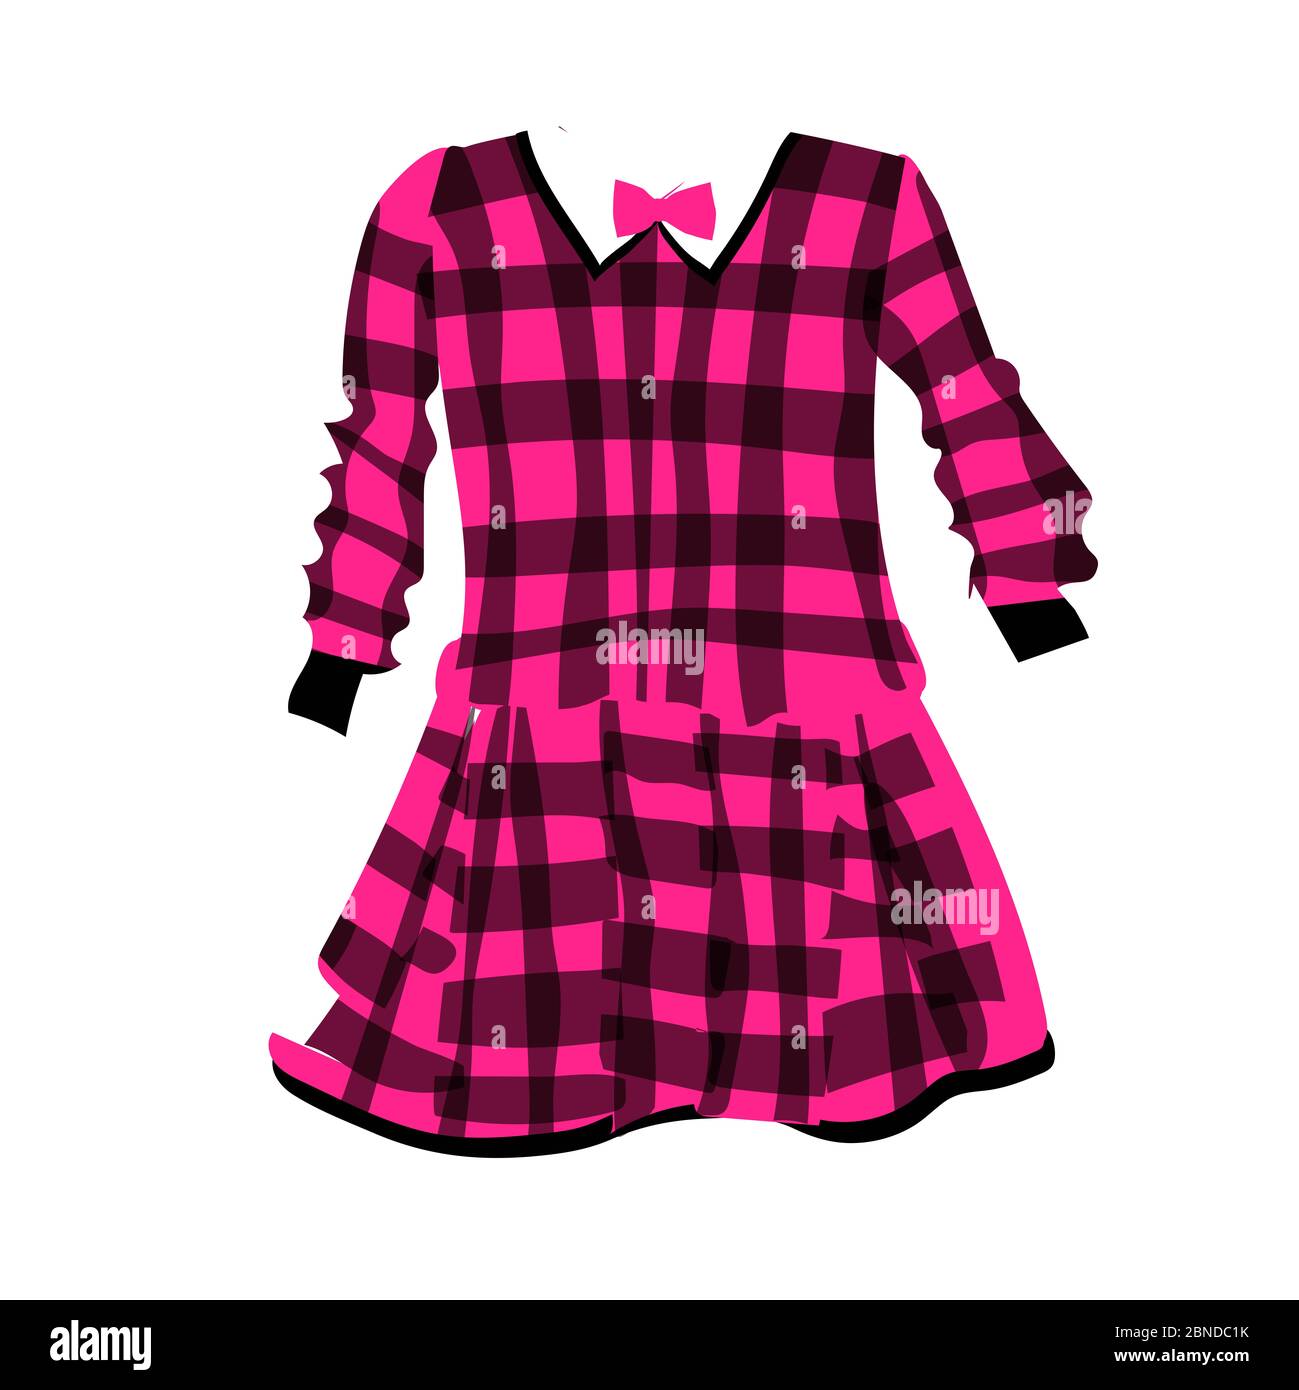 Plaid dress for girls. Fashionable clothes for kids. illustration on a white background. School uniform. Stock Photo